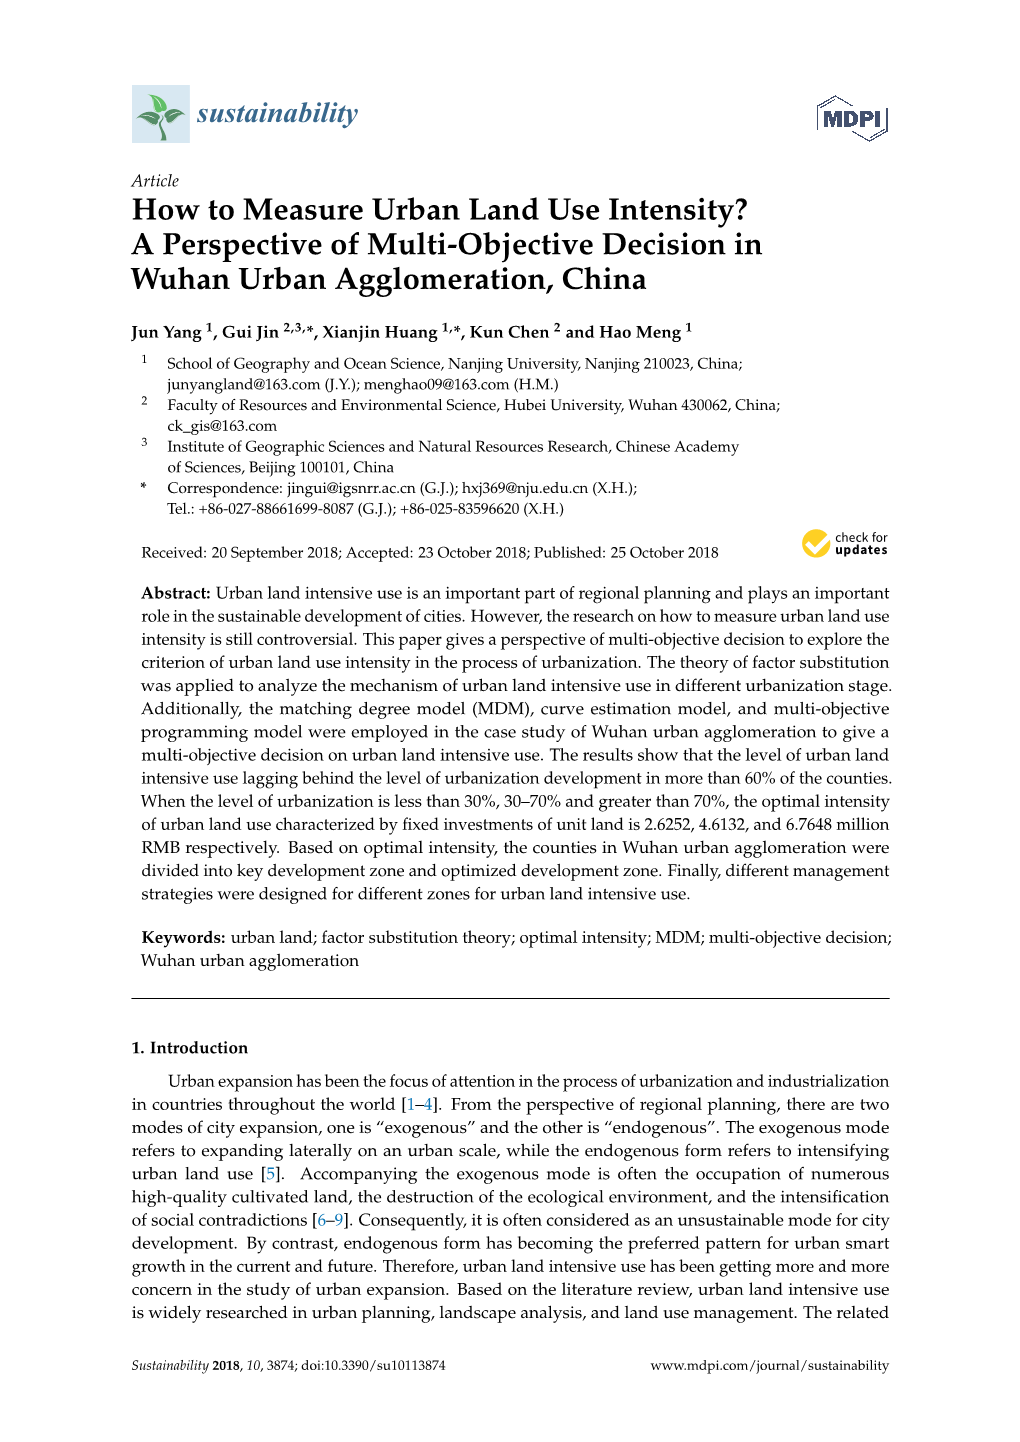 How to Measure Urban Land Use Intensity? a Perspective of Multi-Objective Decision in Wuhan Urban Agglomeration, China